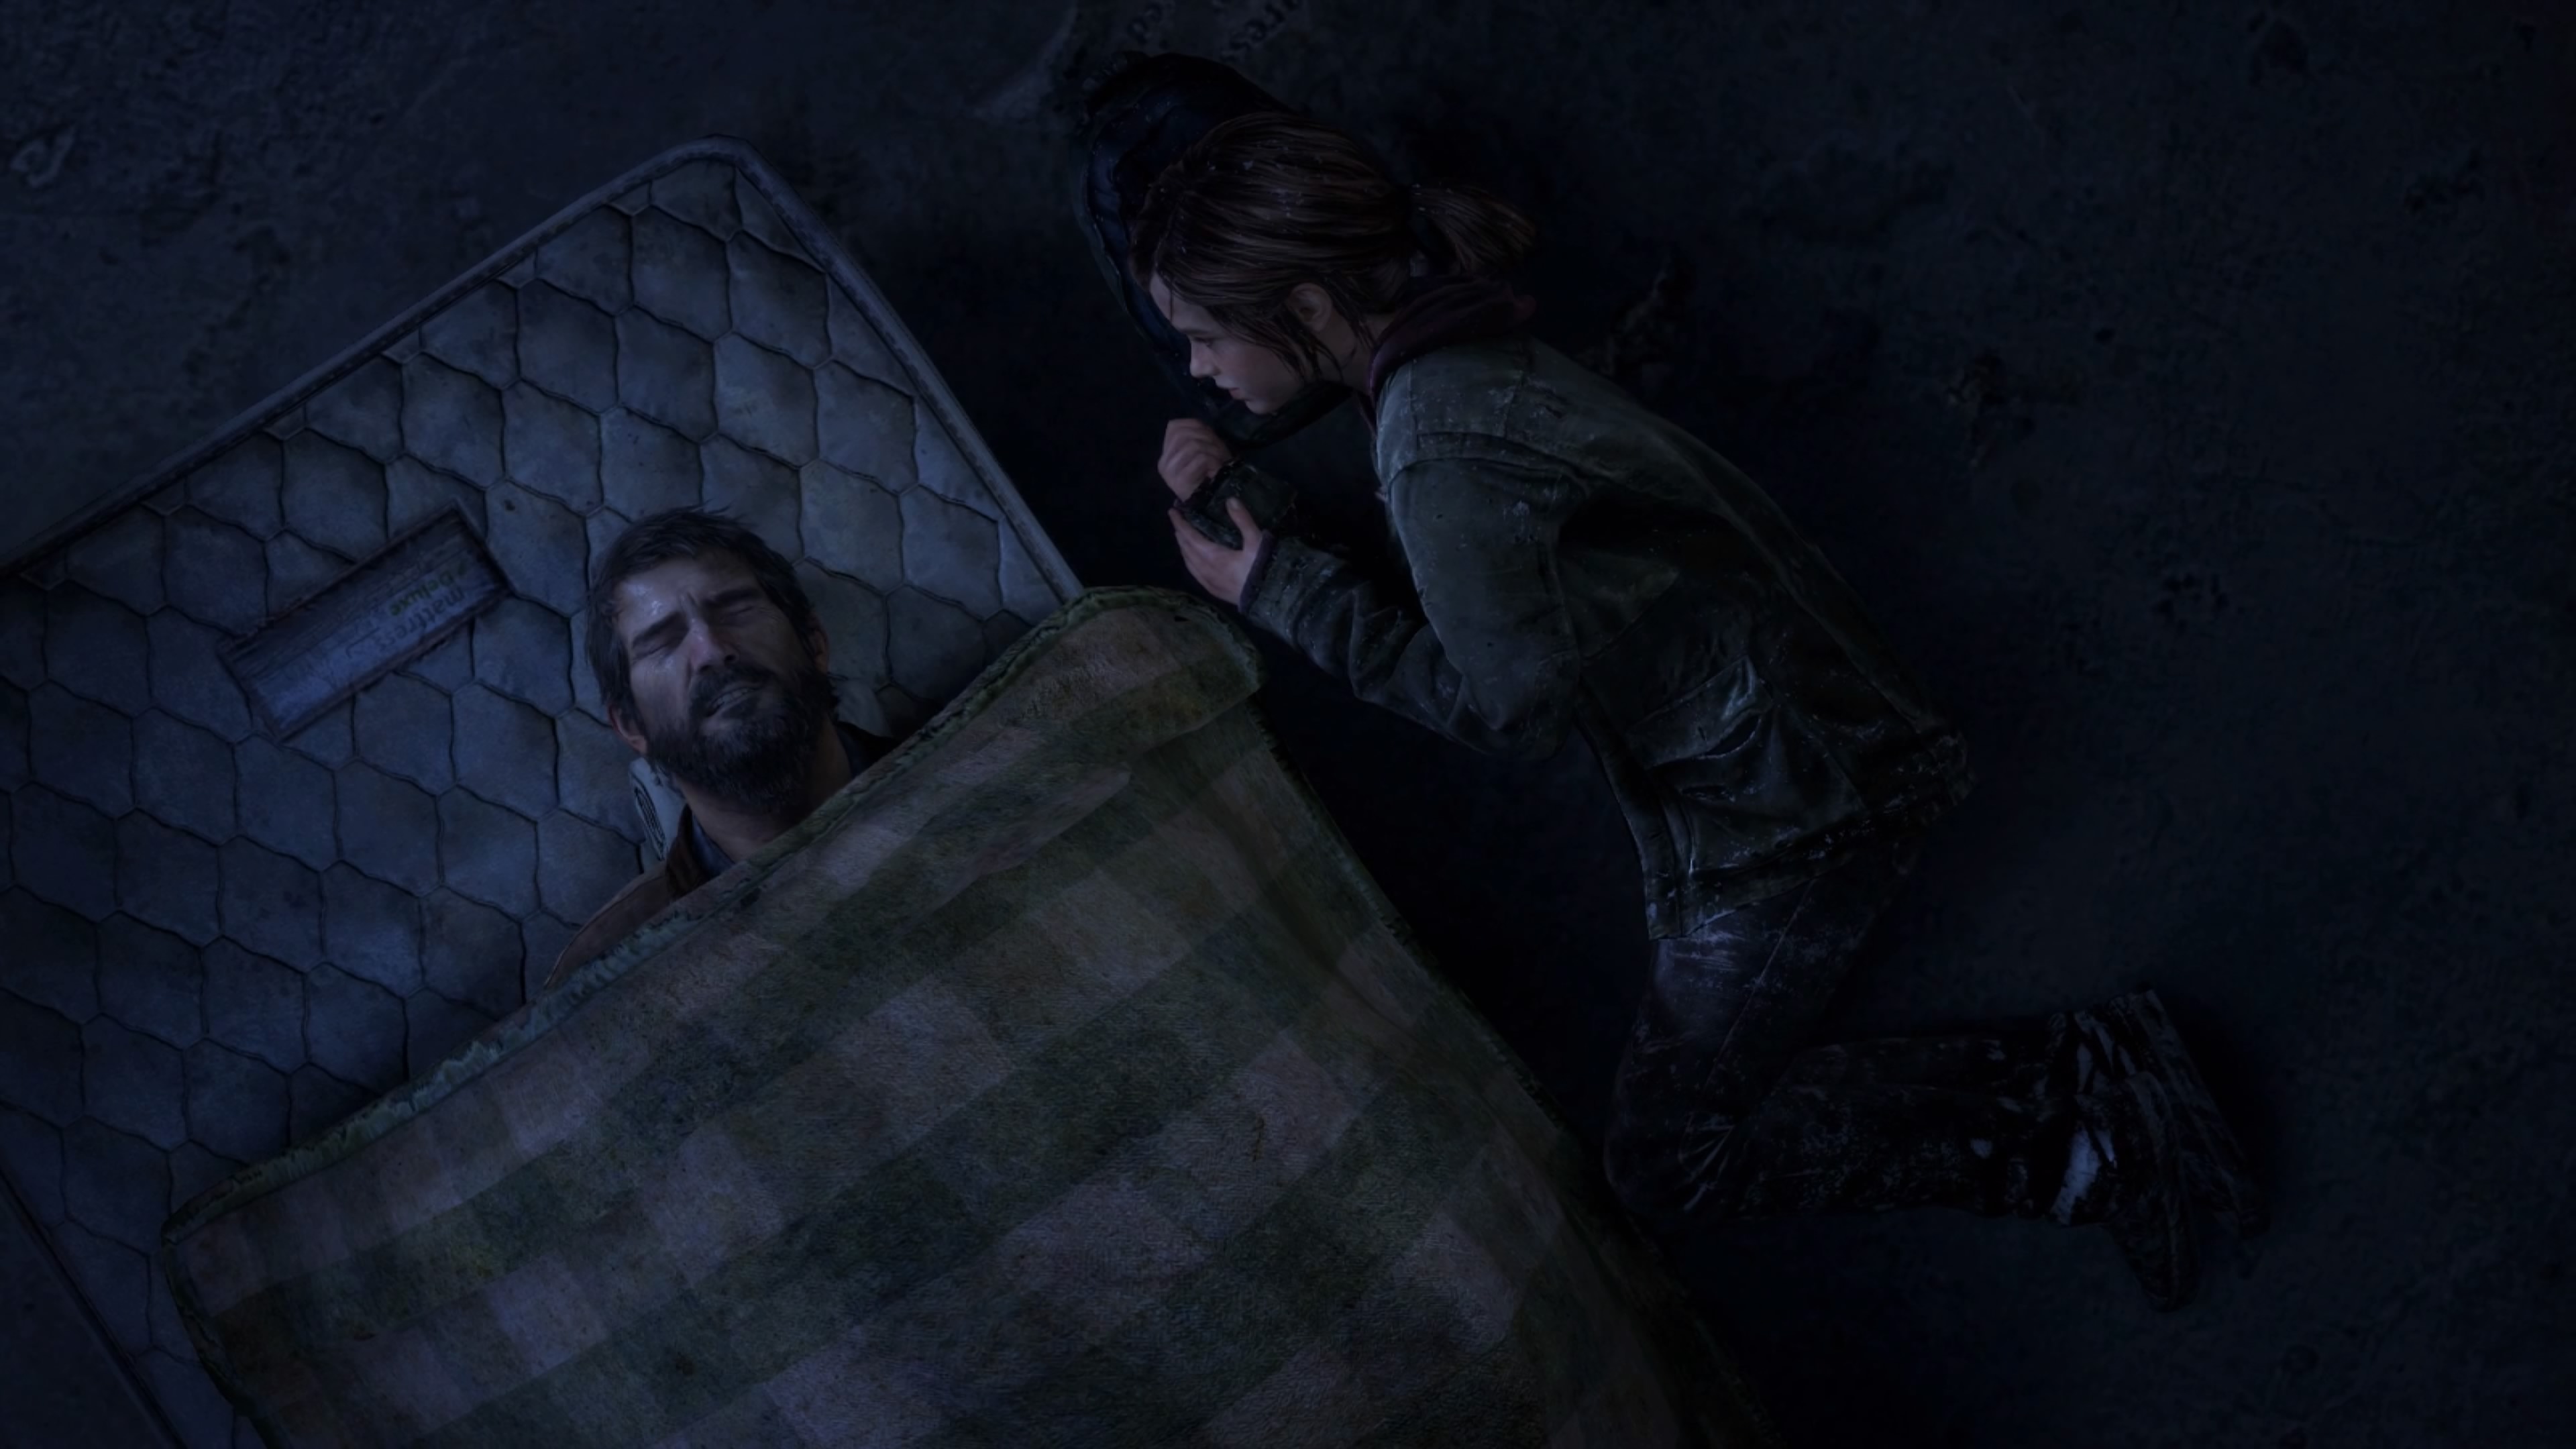 The Last Of Us Ellie Joel Video Games Screen Shot PlayStation 4 Video Game Characters Playstation 4  3840x2160